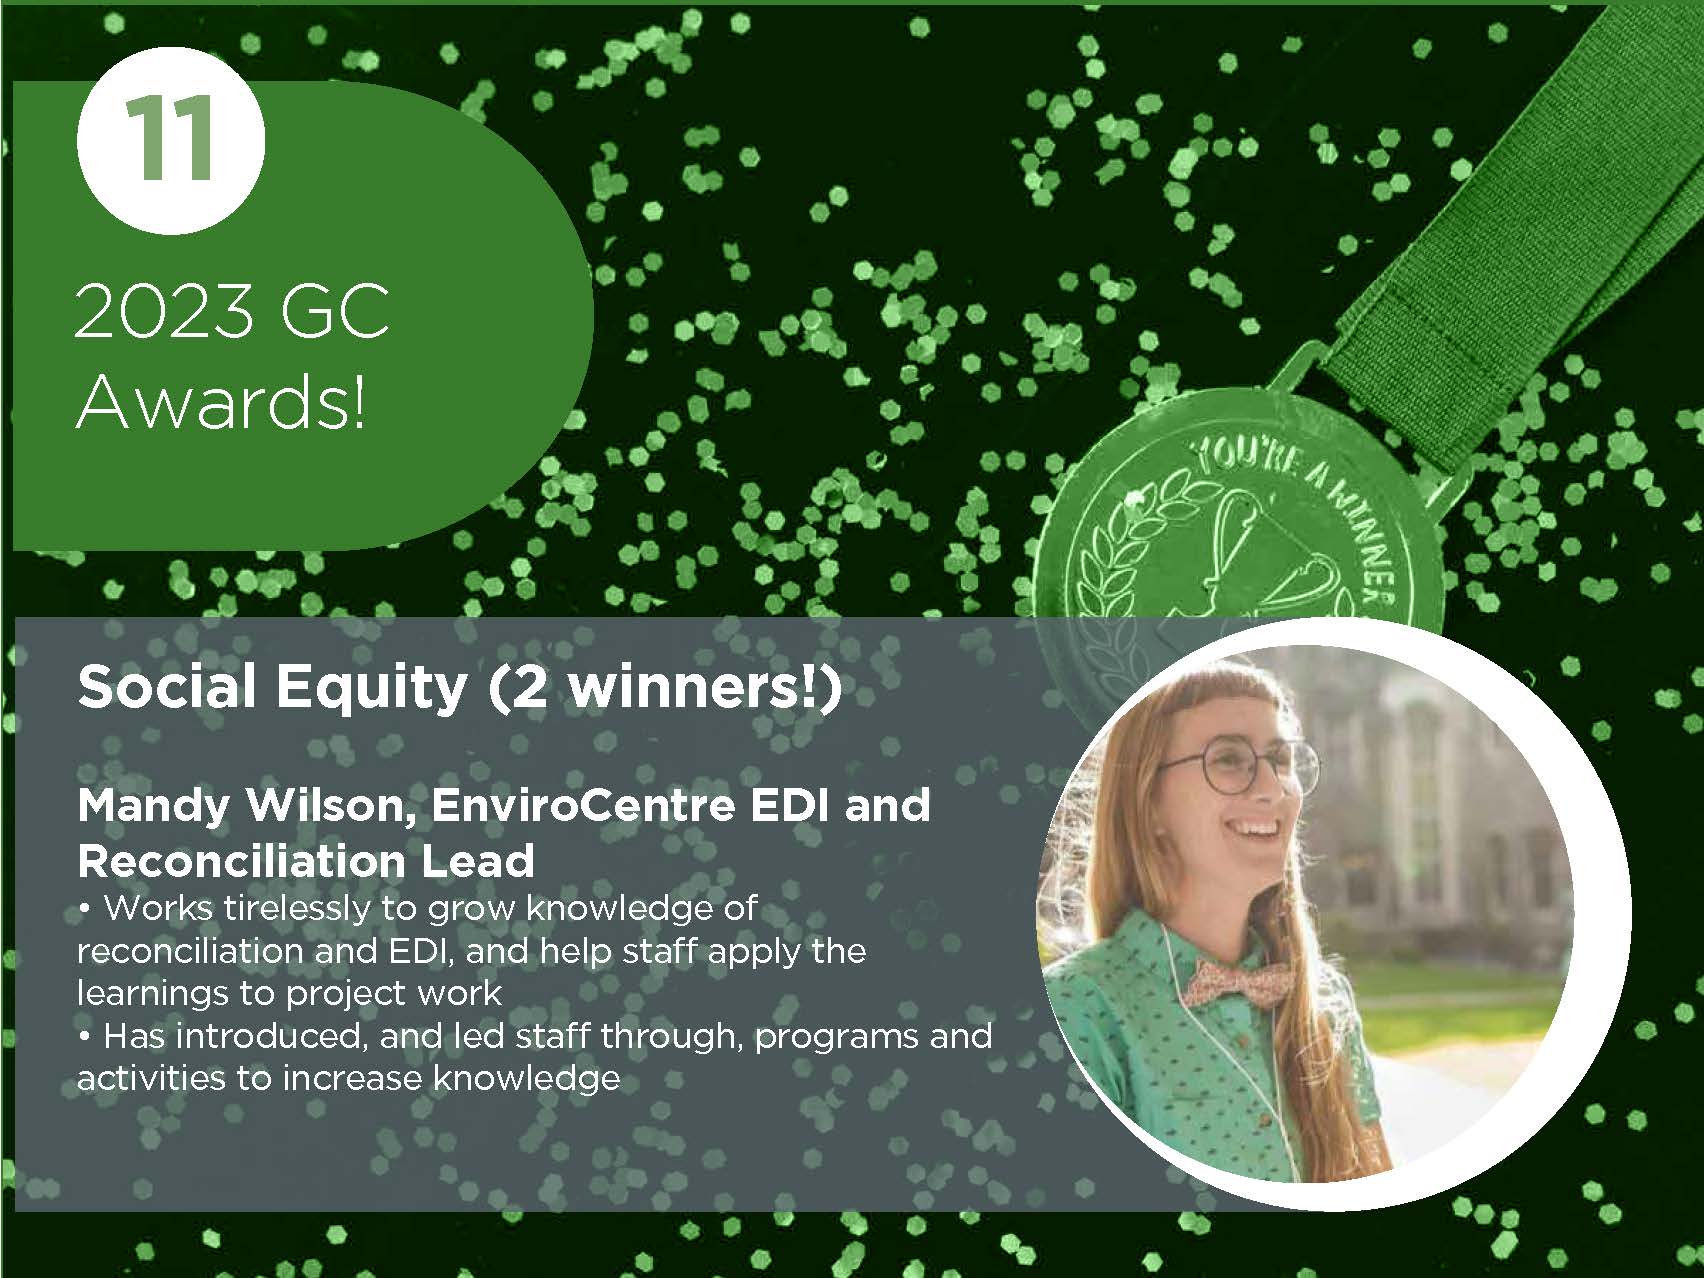 Social Equity (2 winners!) Mandy Wilson, EnviroCentre EDI and Reconciliation Lead • Works tirelessly to grow knowledge of reconciliation and EDI, and help staff apply the learnings to project work • Has introduced, and led staff through, programs and activities to increase knowledge